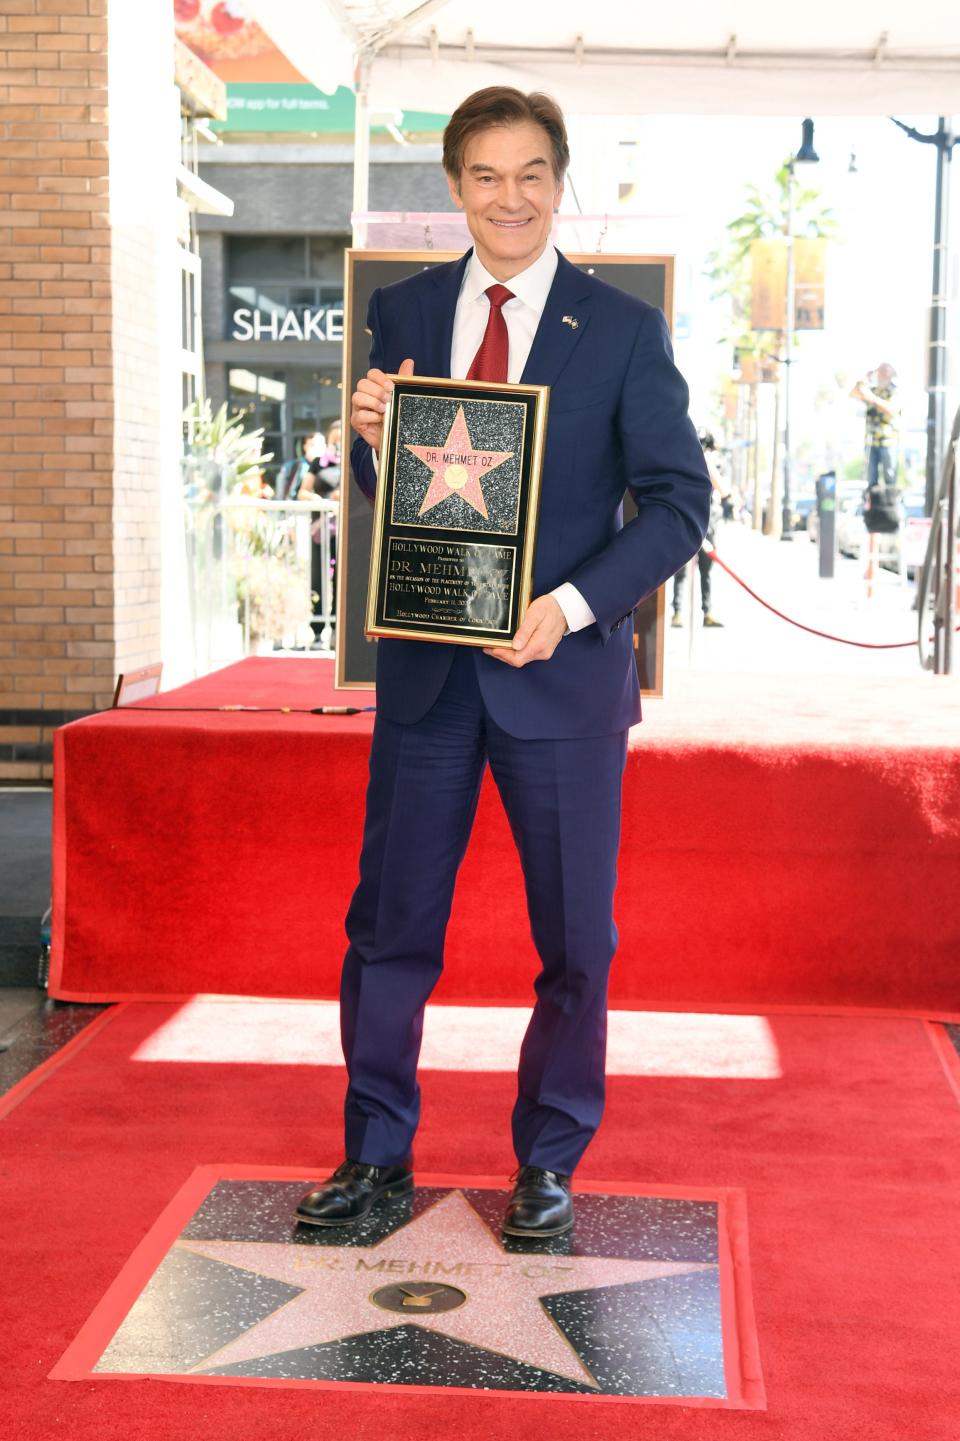 Dr. Mehmet Oz receives a star on the Hollywood Walk of Fame on February 11, 2022, in Hollywood, California.